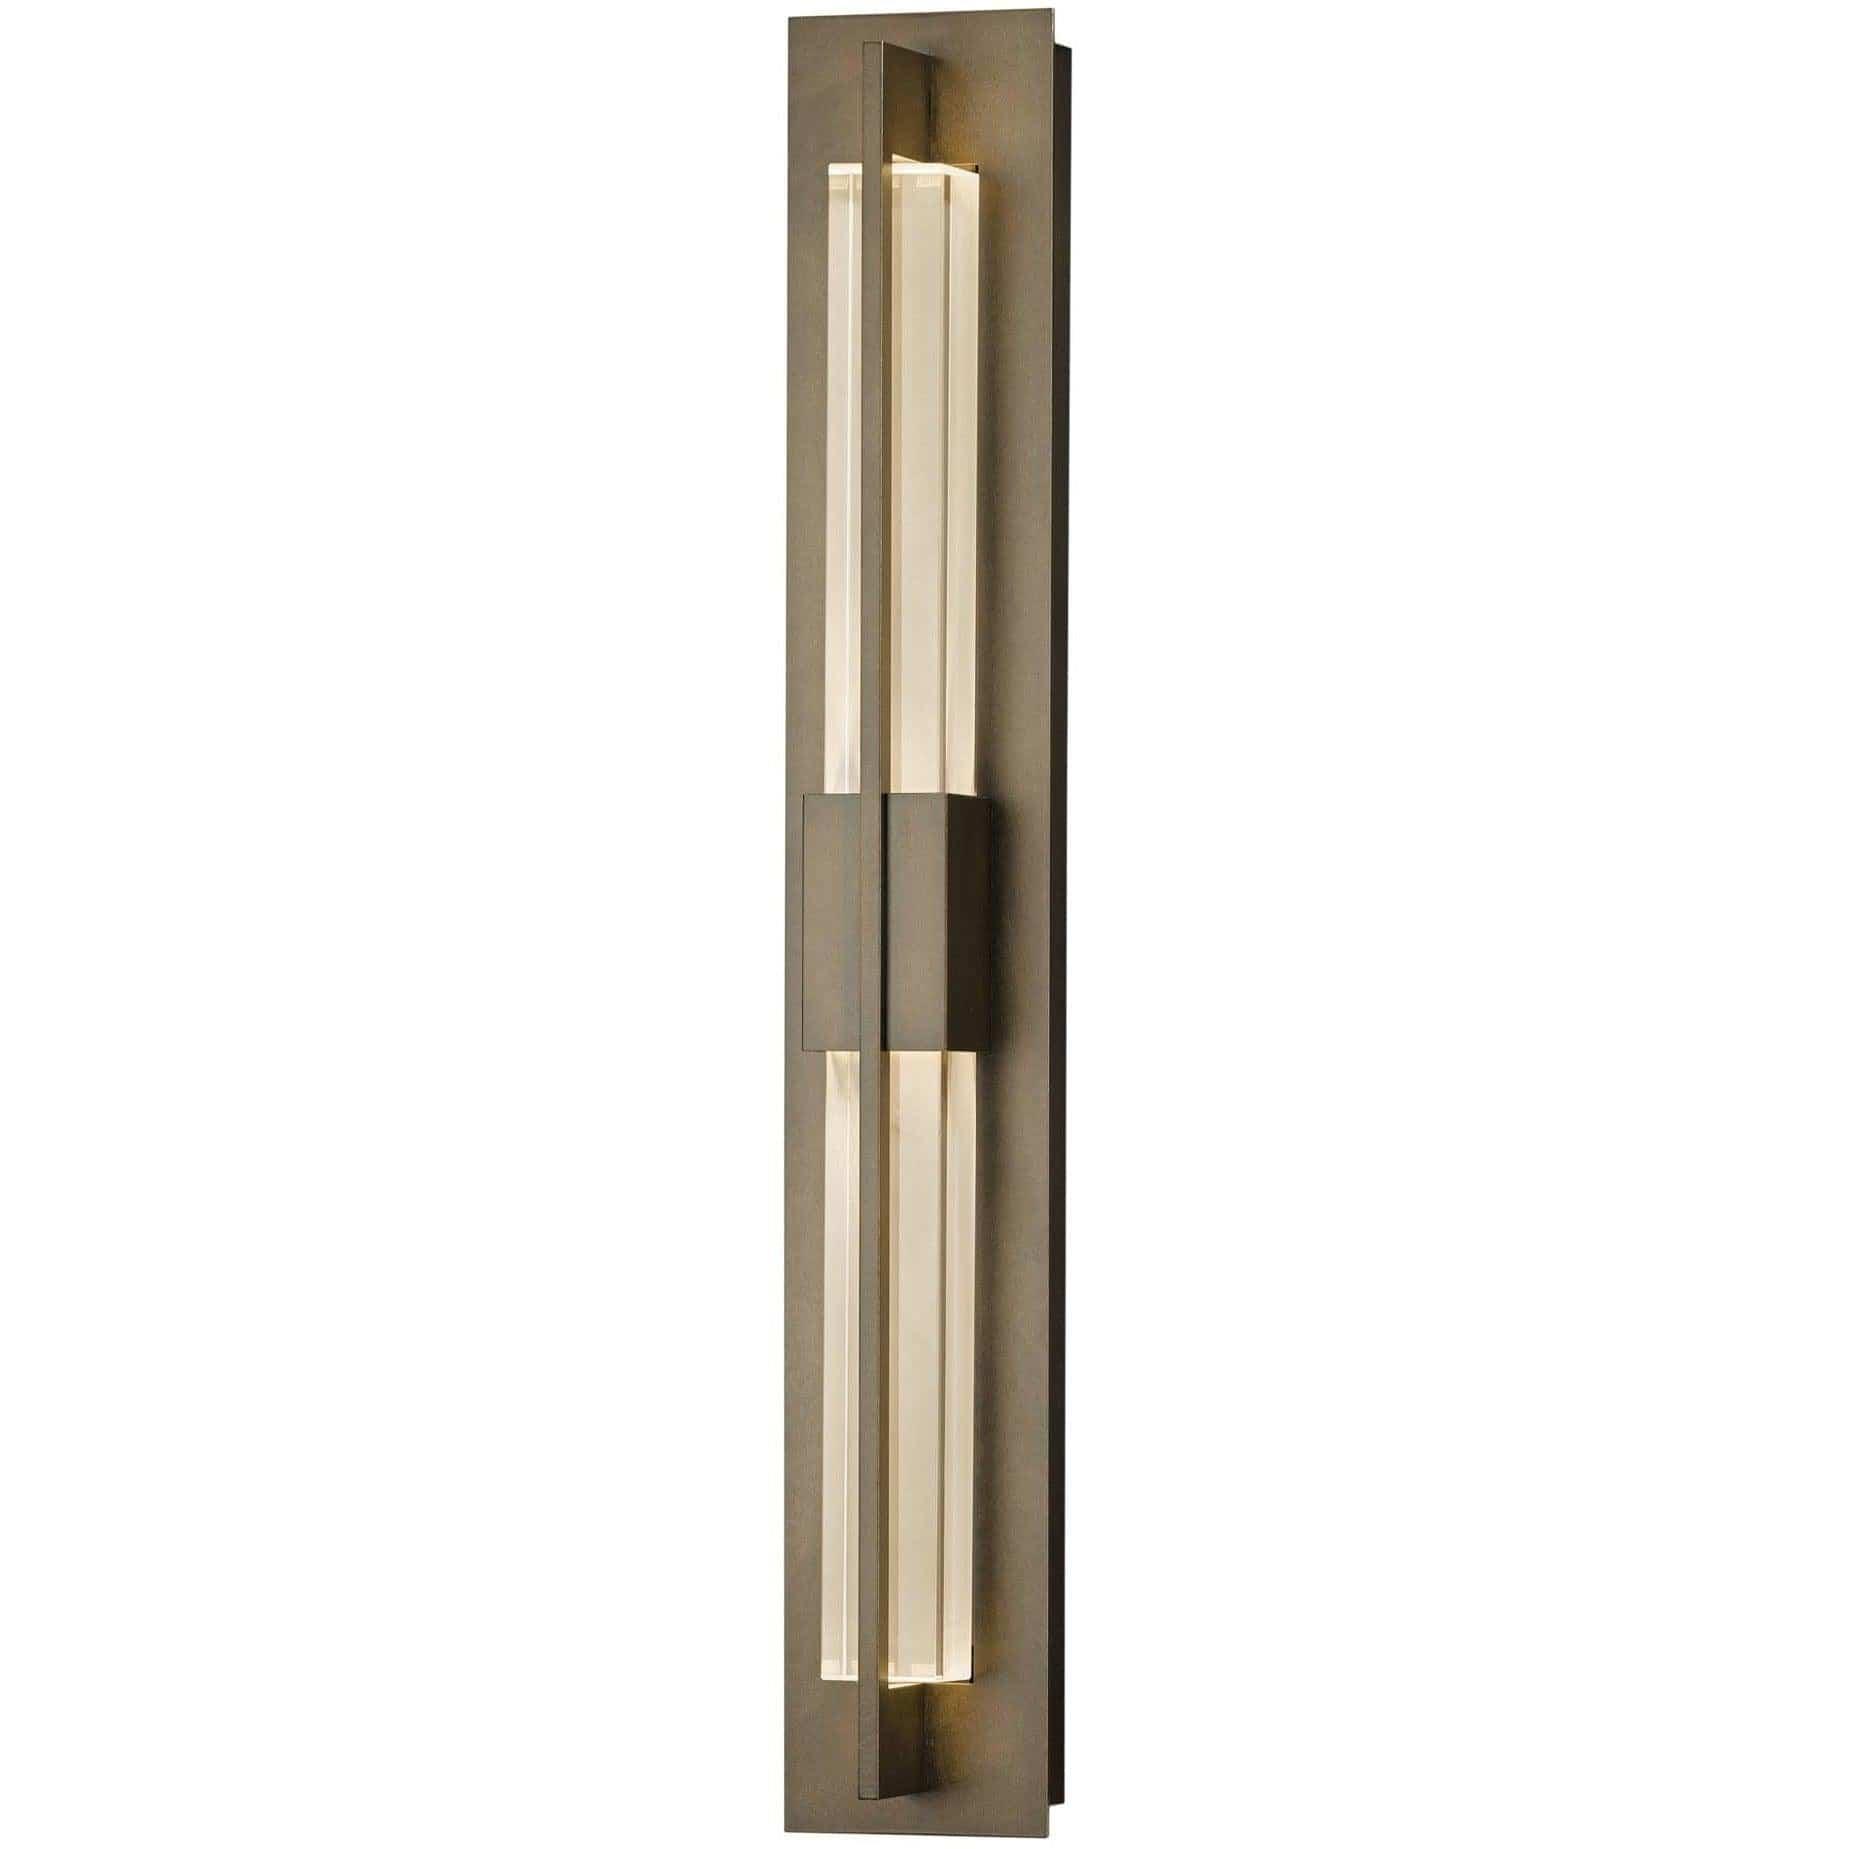 Hubbardton Forge - Axis 31-Inch LED Outdoor Wall Sconce - 306420-LED-75-ZM0332 | Montreal Lighting & Hardware